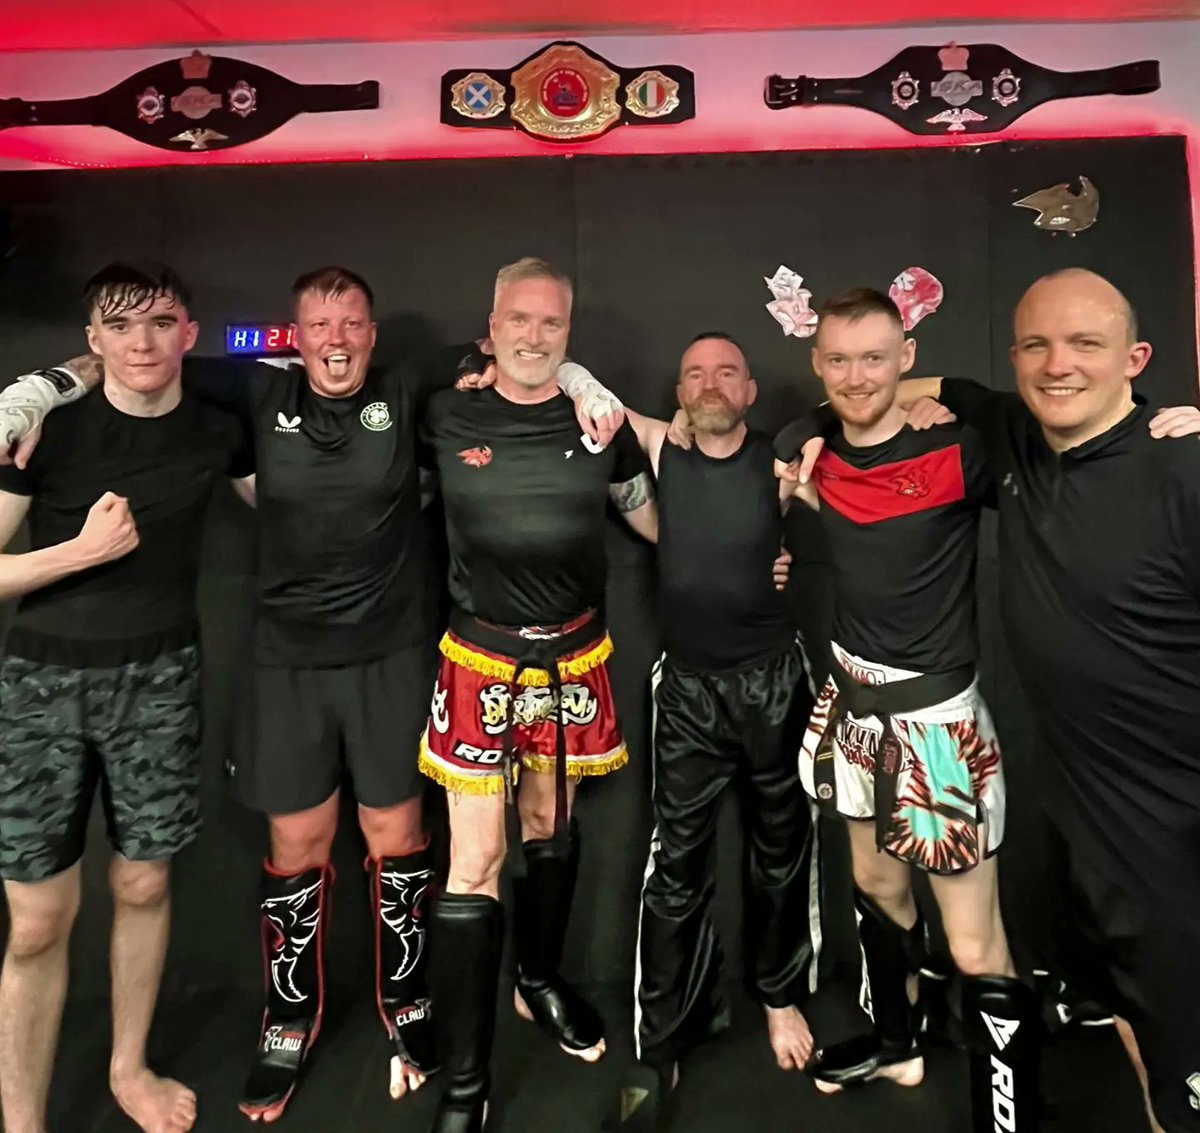 My boy Sean turns 17. For his birthday night out, he wanted to go kickboxing. Fuckin Samurai. Immensely proud of this young man and all he has achieved. Thanks to the crew at Red Rhino for a lovely evening of quality knocks. Oss 👊👊👊